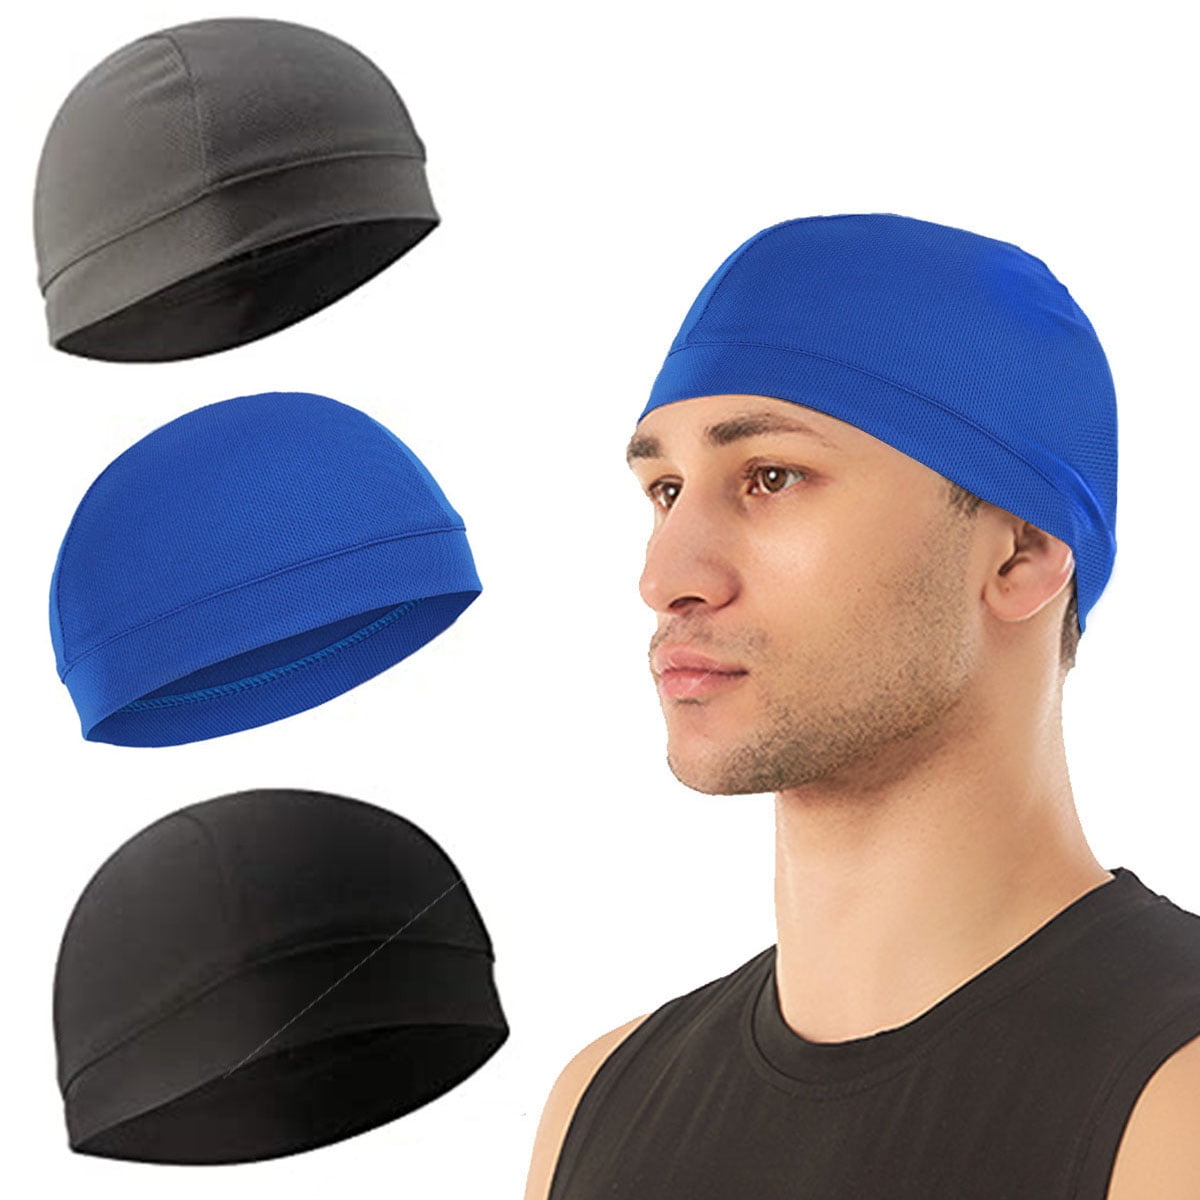 MA STRAP Cooling Skull Cap Sweat Wicking Beanie Cycling Running Helmet Liner for Men and Women Sport Outdoor Activities